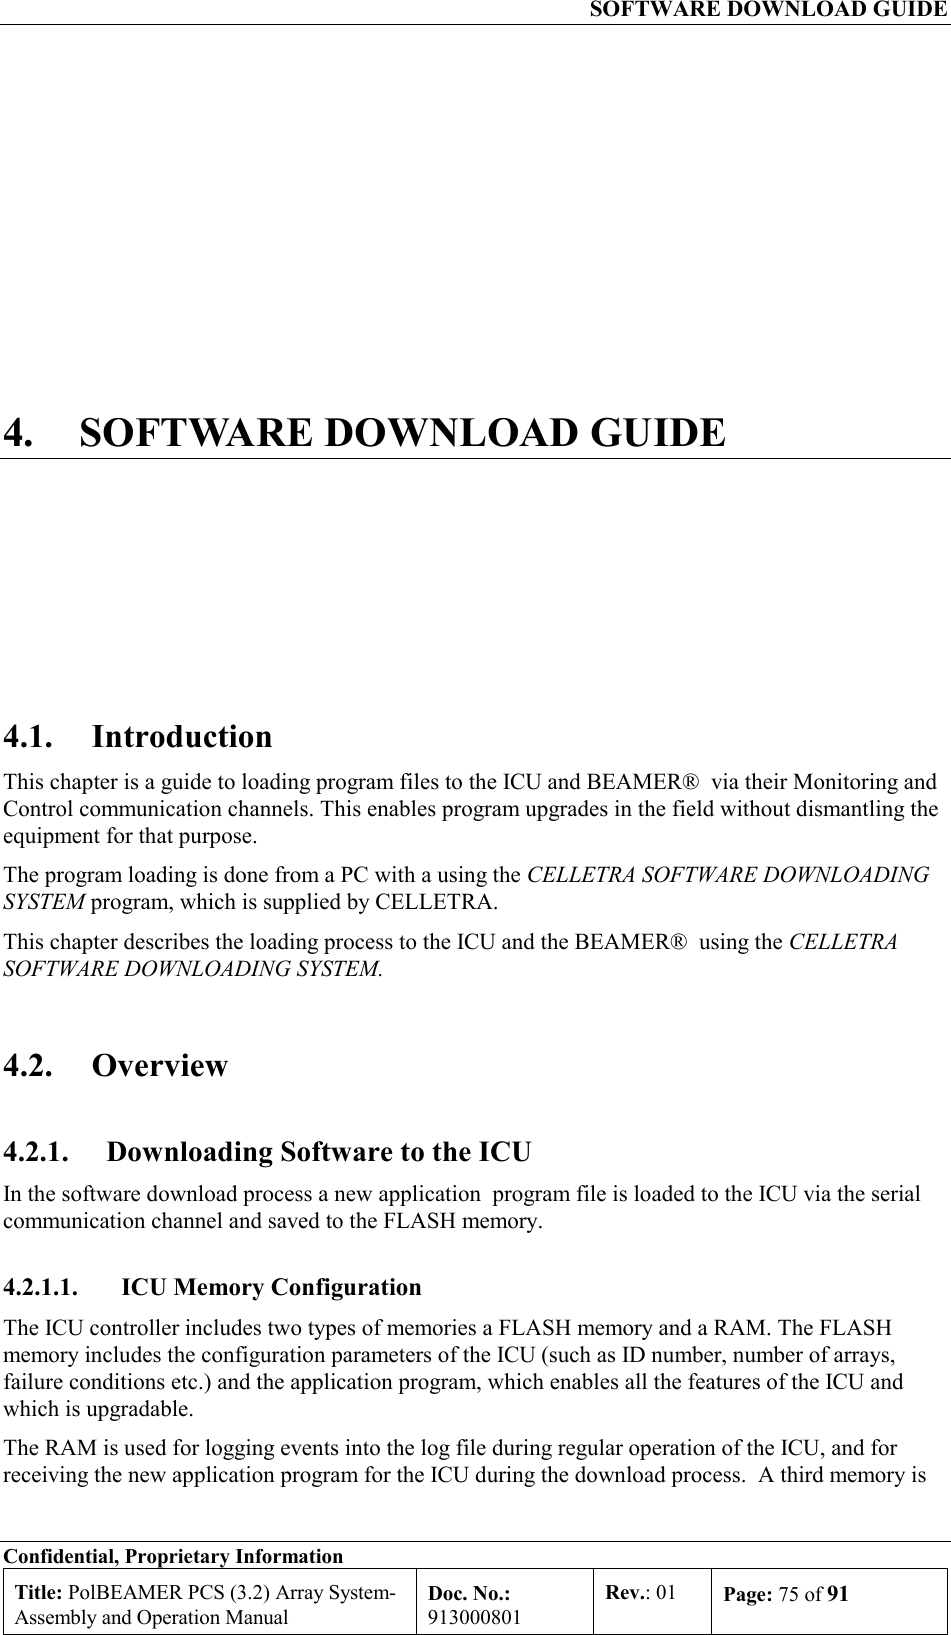   SOFTWARE DOWNLOAD GUIDE Confidential, Proprietary Information Title: PolBEAMER PCS (3.2) Array System- Assembly and Operation Manual Doc. No.: 913000801 Rev.: 01  Page: 75 of 91  4.  SOFTWARE DOWNLOAD GUIDE 4.1. Introduction This chapter is a guide to loading program files to the ICU and BEAMER®  via their Monitoring and Control communication channels. This enables program upgrades in the field without dismantling the equipment for that purpose.  The program loading is done from a PC with a using the CELLETRA SOFTWARE DOWNLOADING SYSTEM program, which is supplied by CELLETRA. This chapter describes the loading process to the ICU and the BEAMER®  using the CELLETRA SOFTWARE DOWNLOADING SYSTEM.  4.2. Overview 4.2.1.  Downloading Software to the ICU In the software download process a new application  program file is loaded to the ICU via the serial communication channel and saved to the FLASH memory. 4.2.1.1.  ICU Memory Configuration The ICU controller includes two types of memories a FLASH memory and a RAM. The FLASH memory includes the configuration parameters of the ICU (such as ID number, number of arrays, failure conditions etc.) and the application program, which enables all the features of the ICU and which is upgradable.  The RAM is used for logging events into the log file during regular operation of the ICU, and for receiving the new application program for the ICU during the download process.  A third memory is 